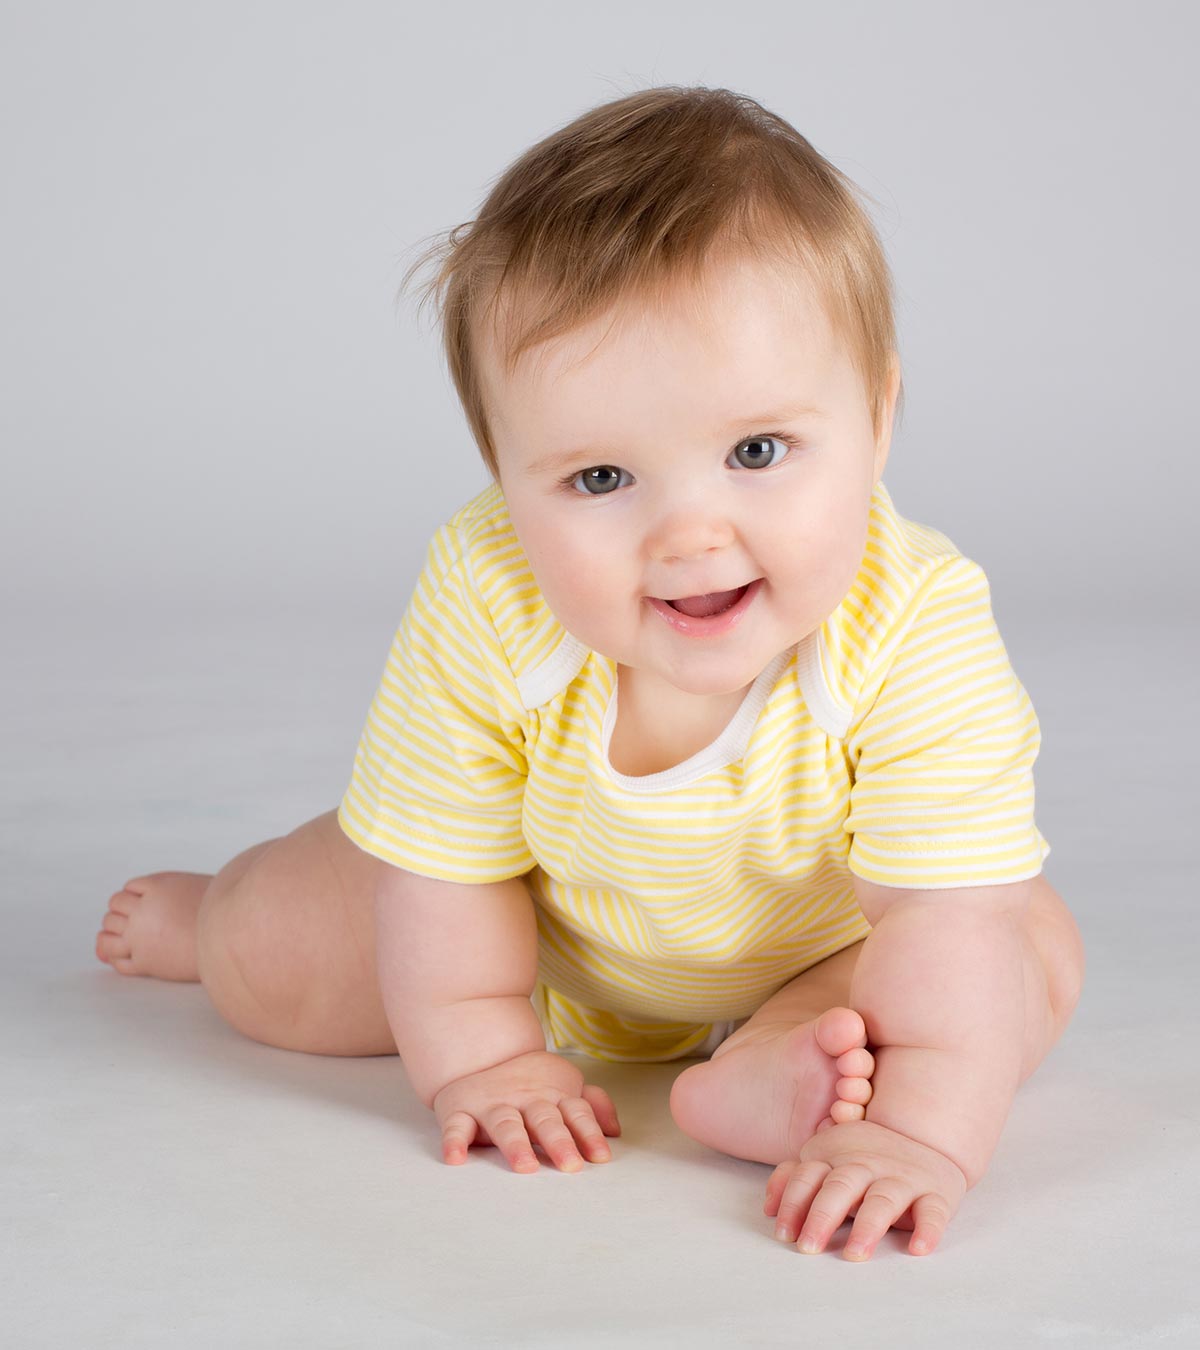 10-Month-Old Baby: Development, Milestones And Growth